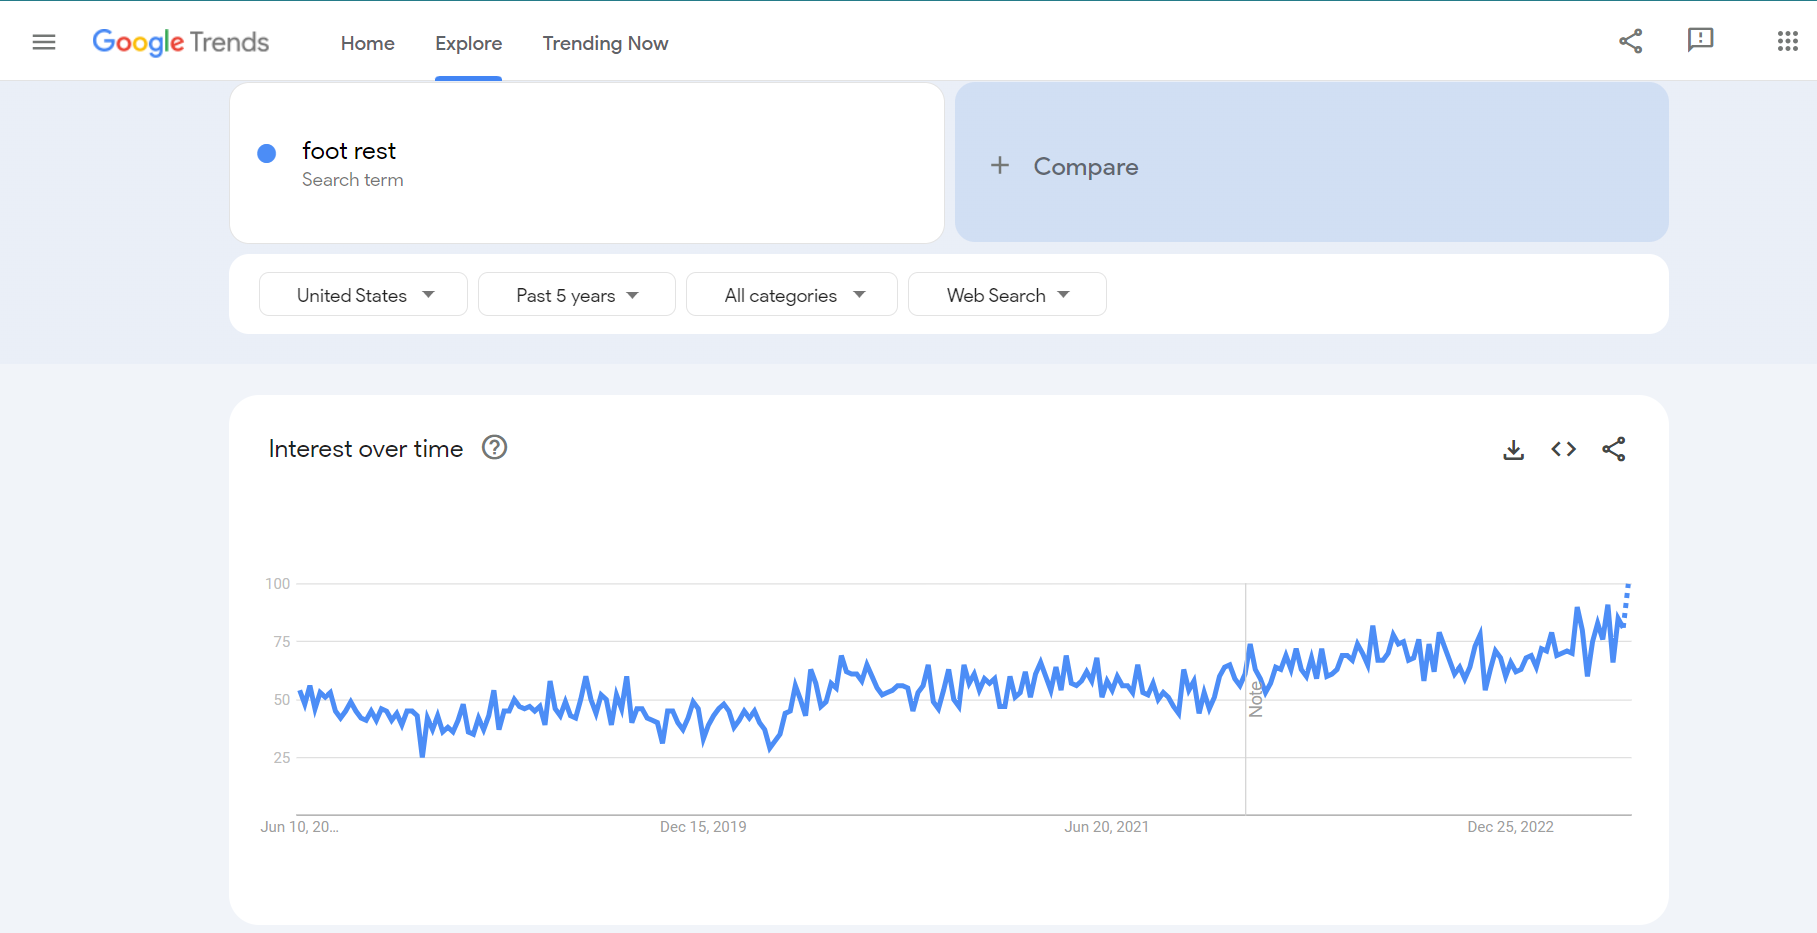 How to Choose the Best Product to Sell Online - Google Trends Result